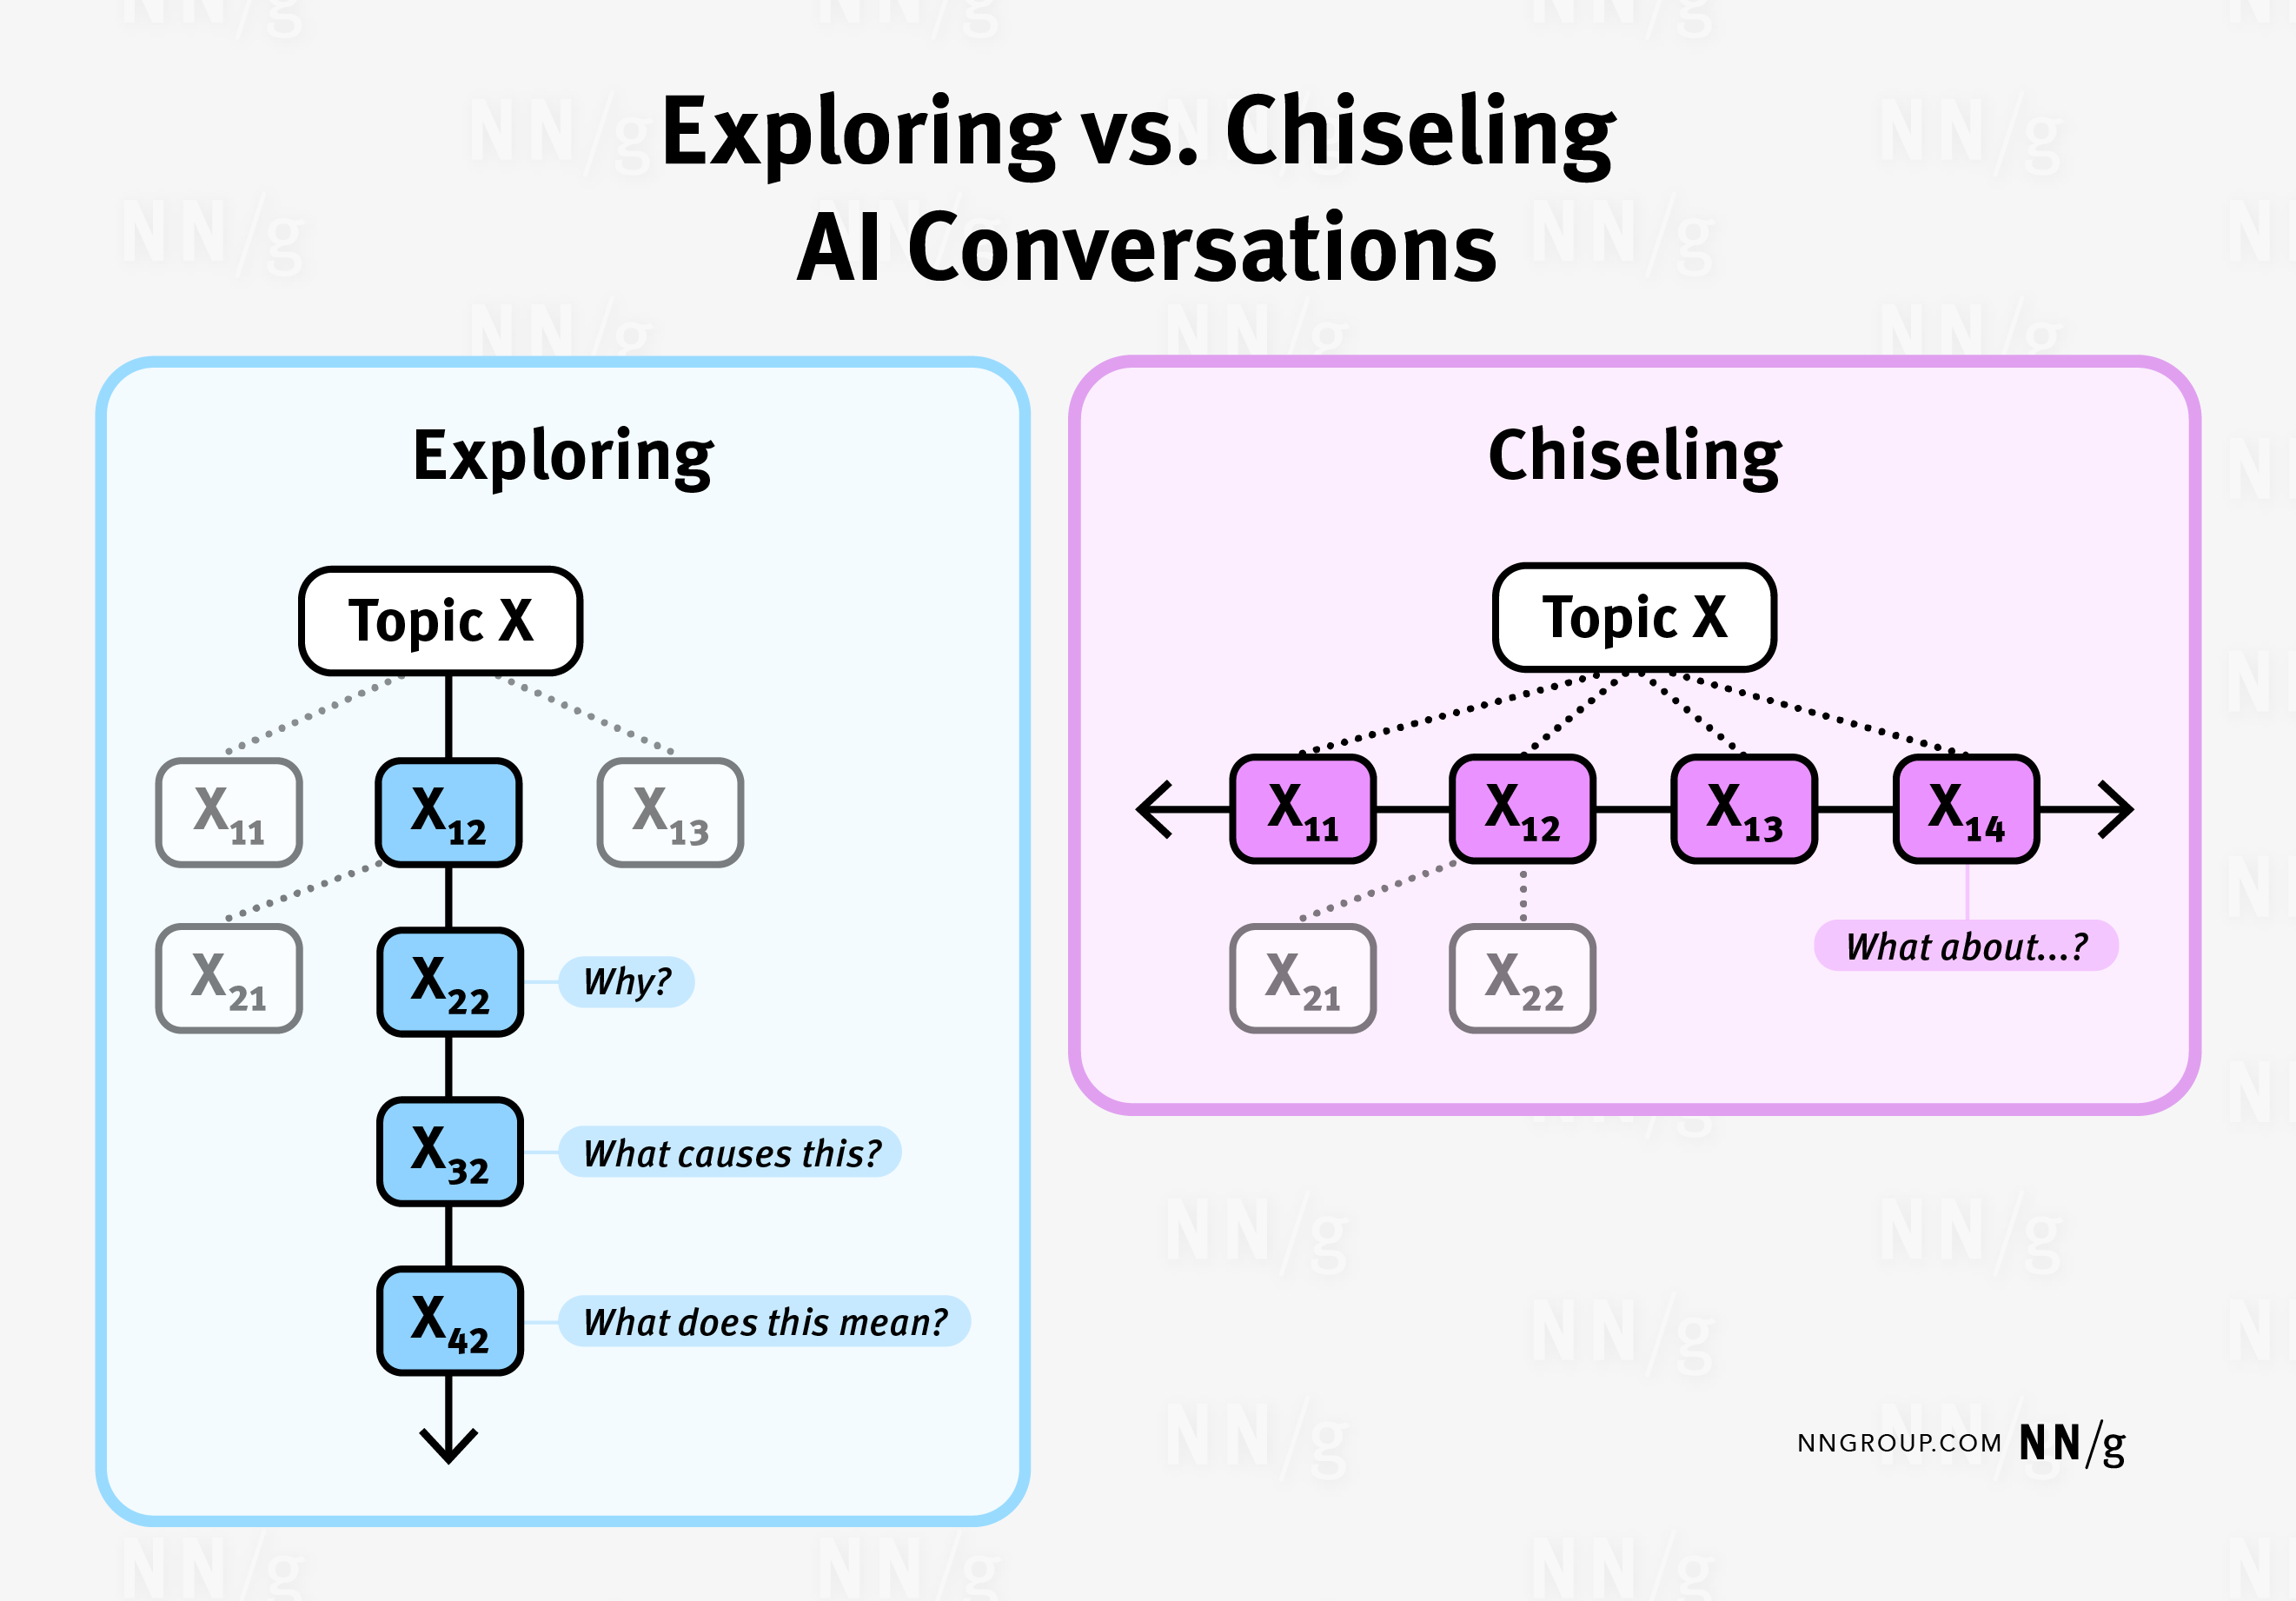 Graphic showing an "exploring" conversation, with a topic having follow up questions such as Why, What causes this, what does this mean. And then a chiseling conversation which shoes adjacent follow-up questions to a topic, such as "what about...x"